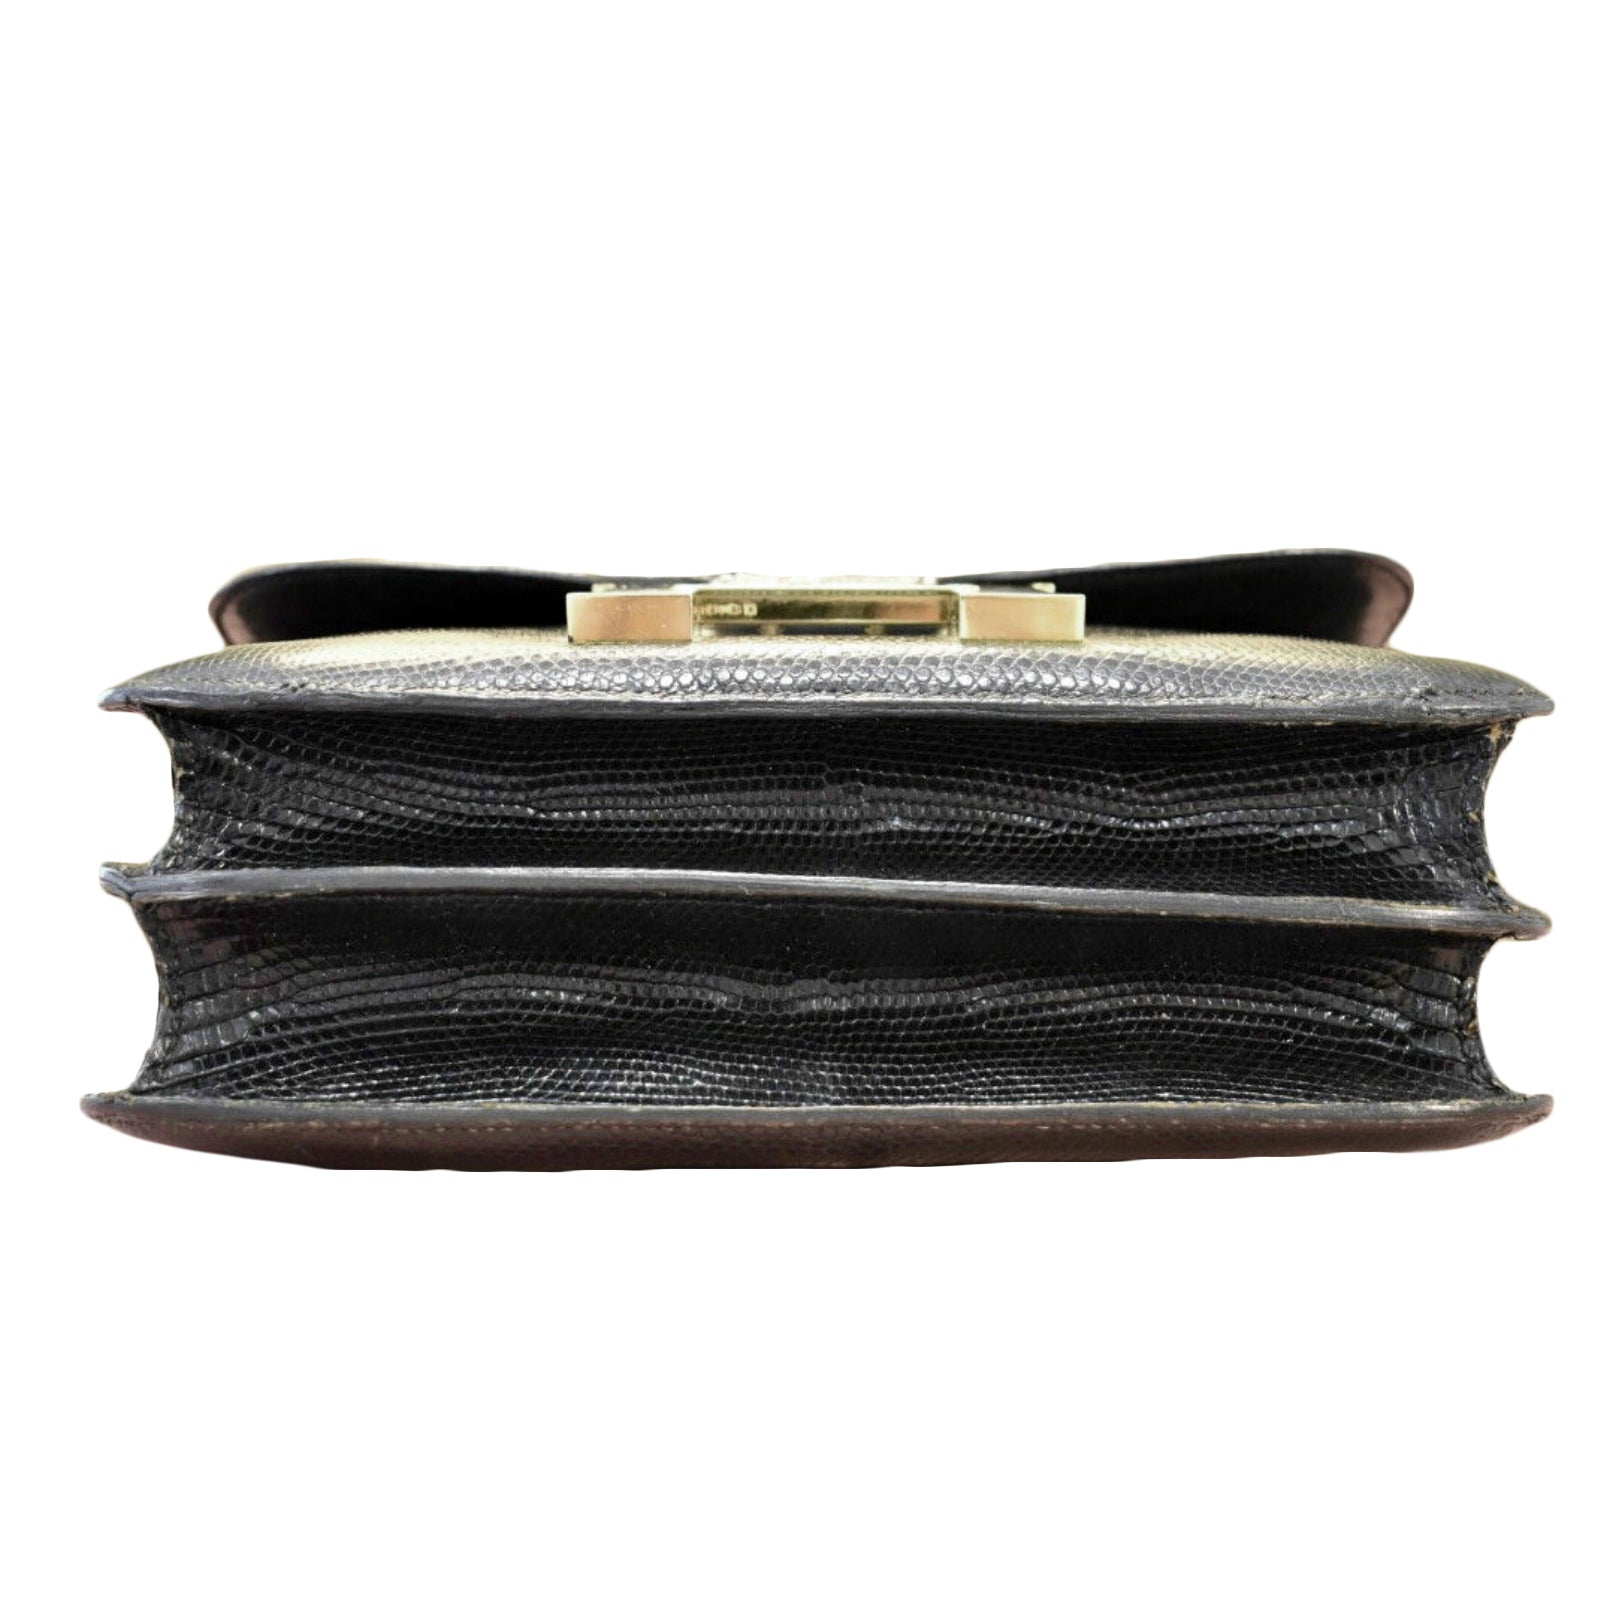 Hermes Constance To Go Wallet on Chain Black and Gold Hardware